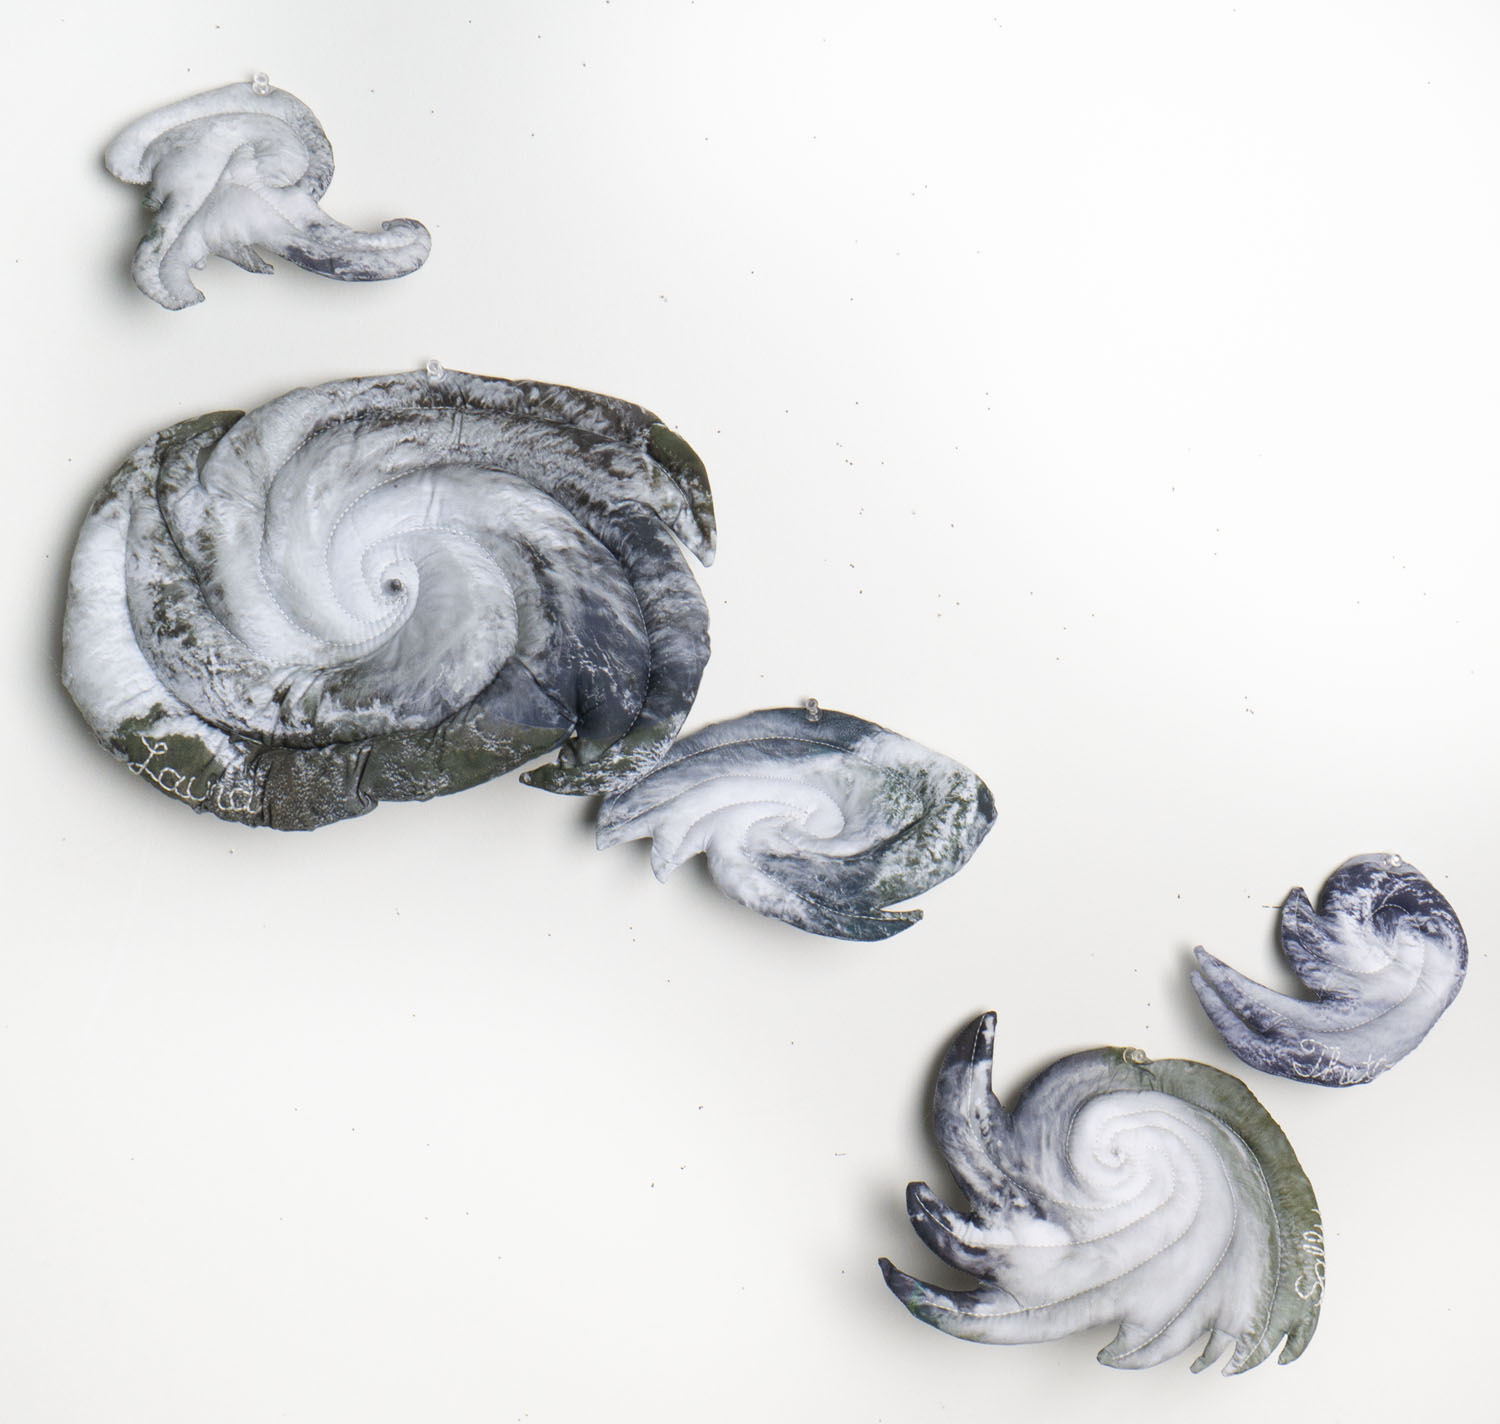 Christine Chin • <em>Stuffed Storms: 2020 Atlantic Tropical Storm Season</em> • Stuffed and quilted archival ink prints on fabric • $2,500.00